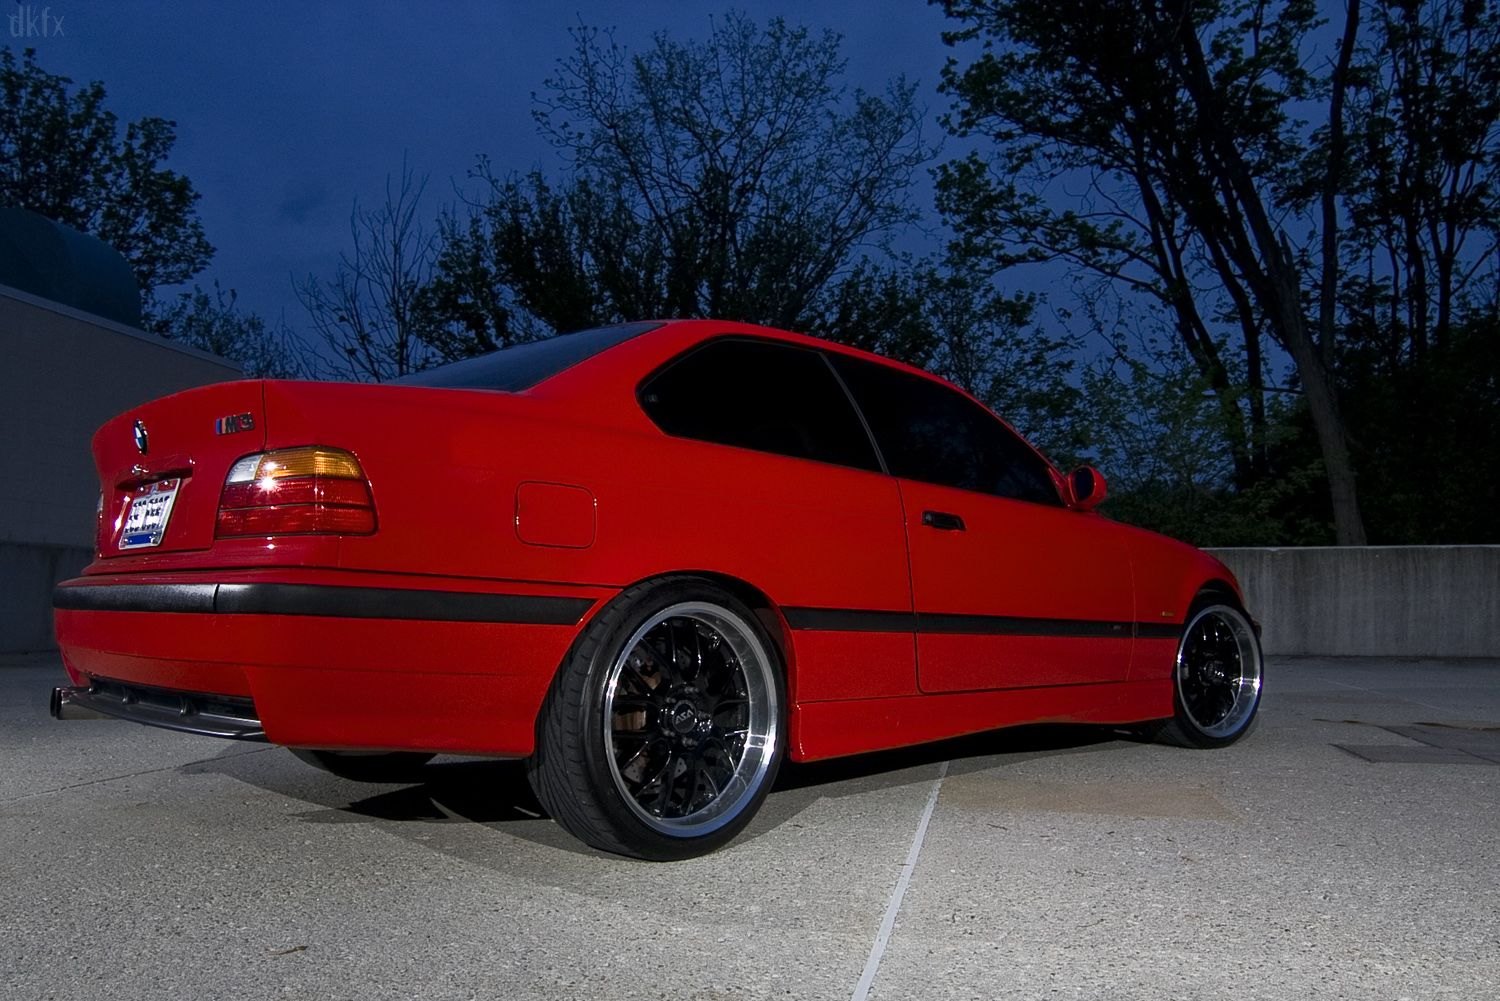 Red BMW 3-Series with Aftermarket Rear Diffuser - Photo by dan kinzie